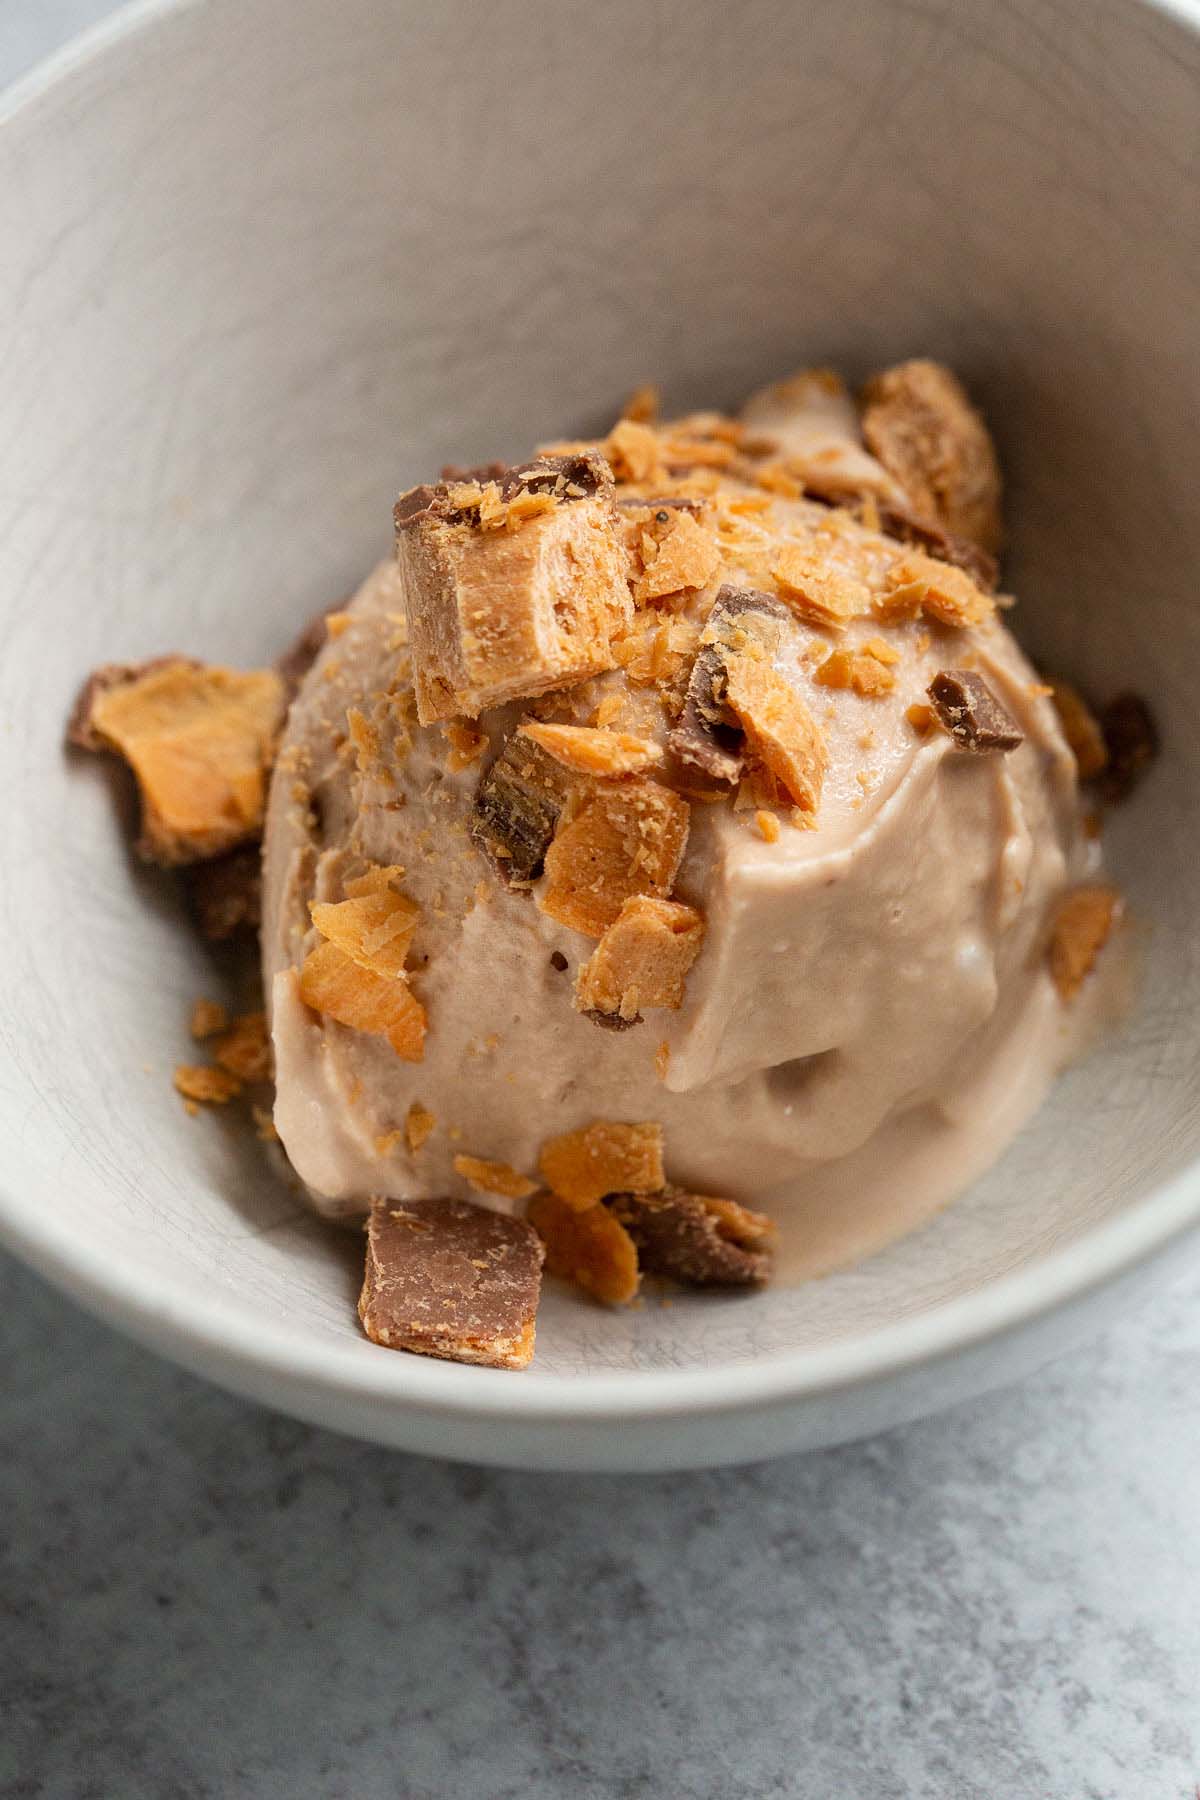 Chocolate peanut butter creami in a bowl